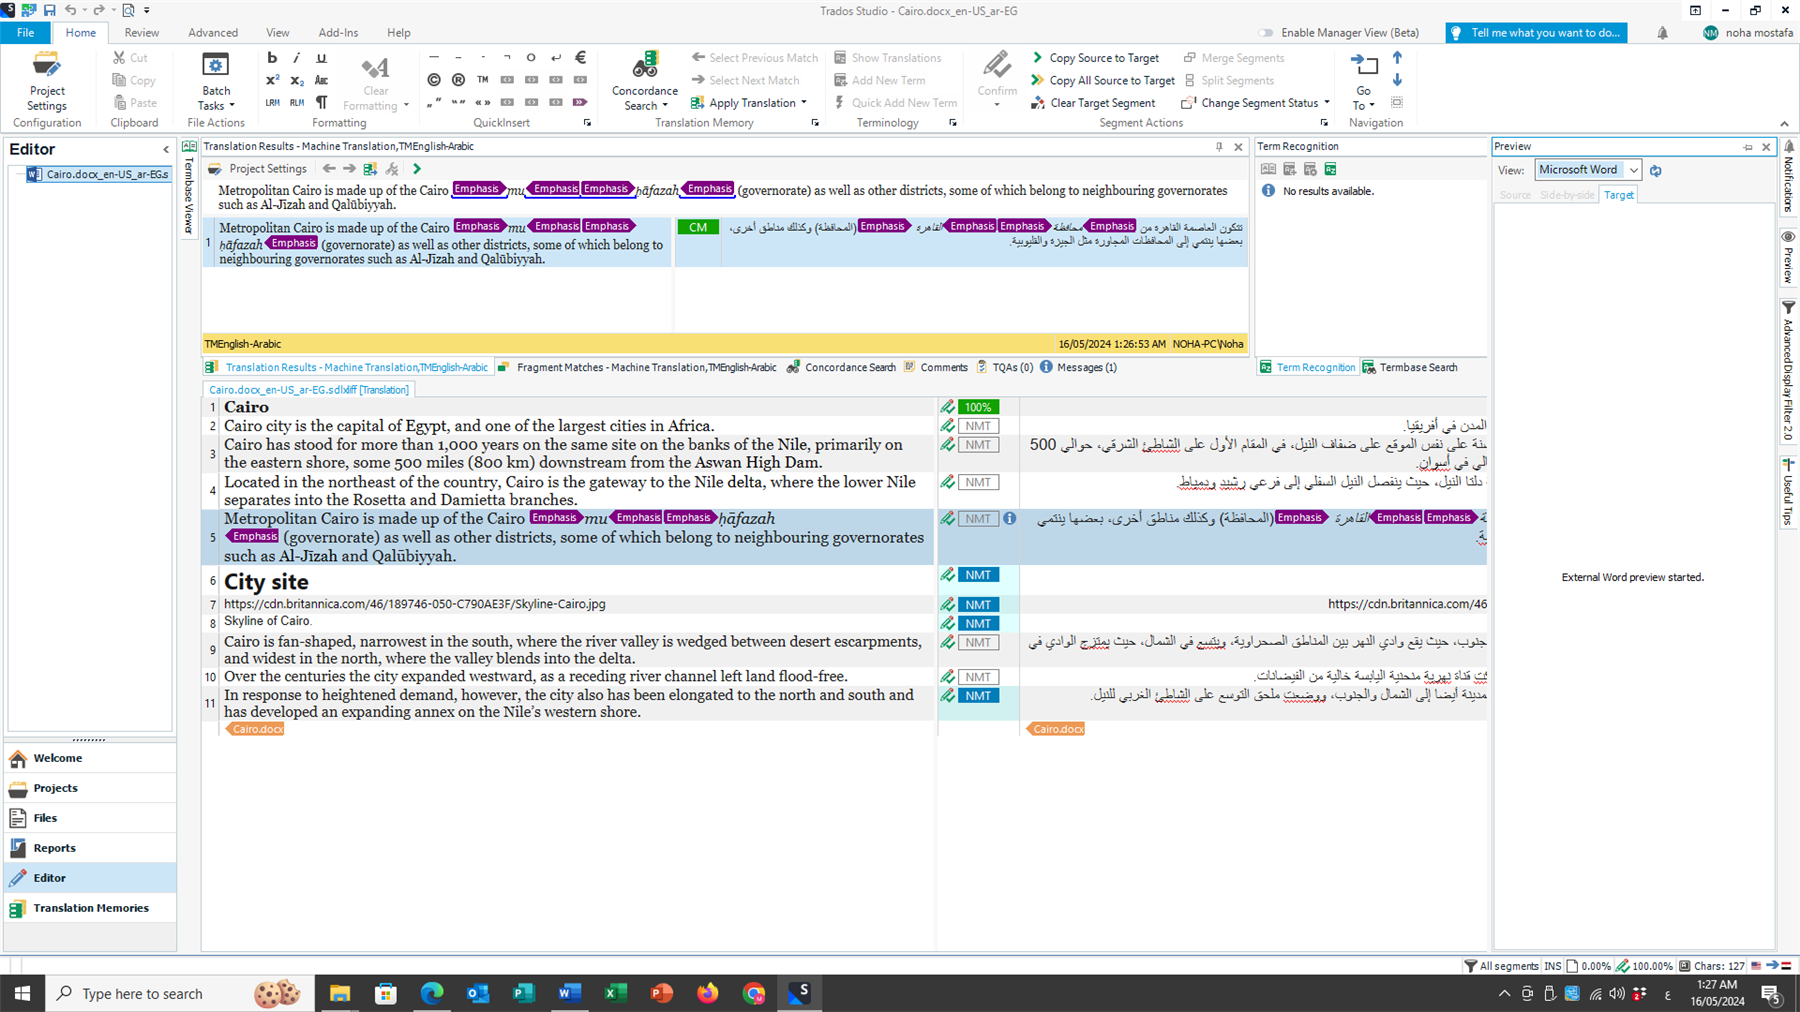 Screenshot of Trados Studio editor with a translation project open, showing the source and target segments, and a message 'External Word preview started.'